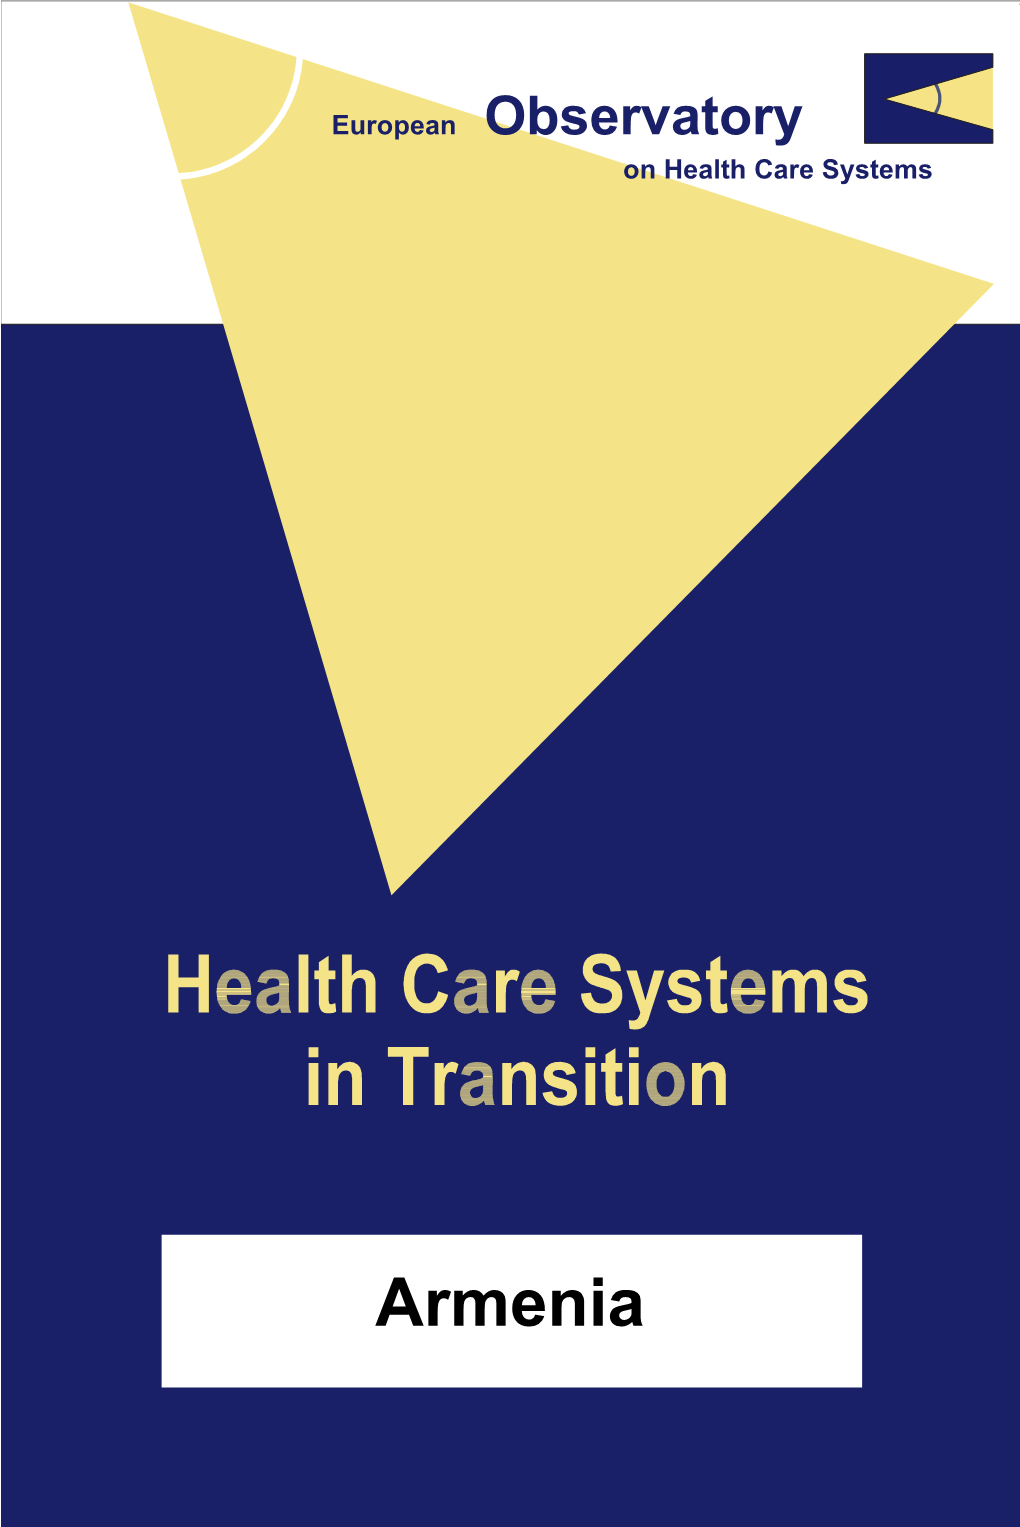 Armenia Health Care Systems in Transition I IONAL B at an RN K E F T O N R I WORLD BANK